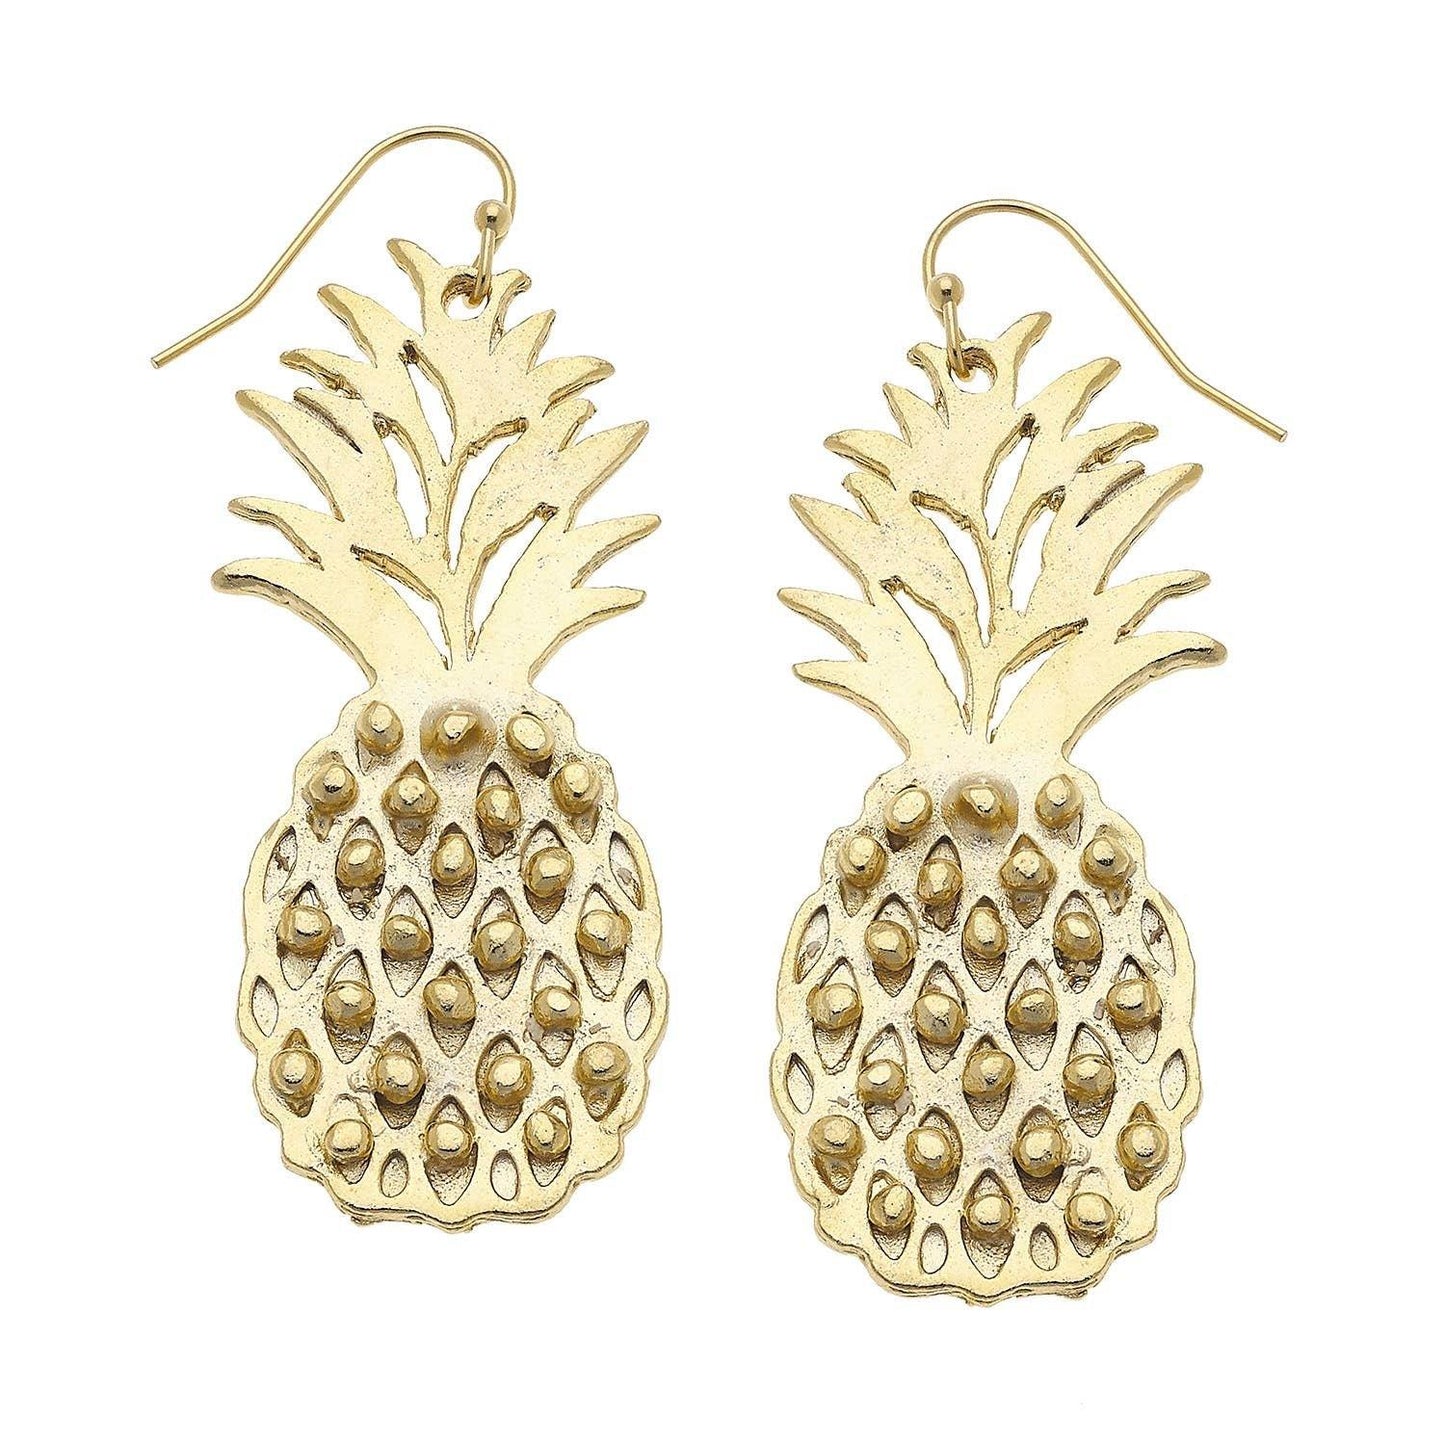 Handcast Large Gold Pineapple Earrings - Pink Julep Boutique